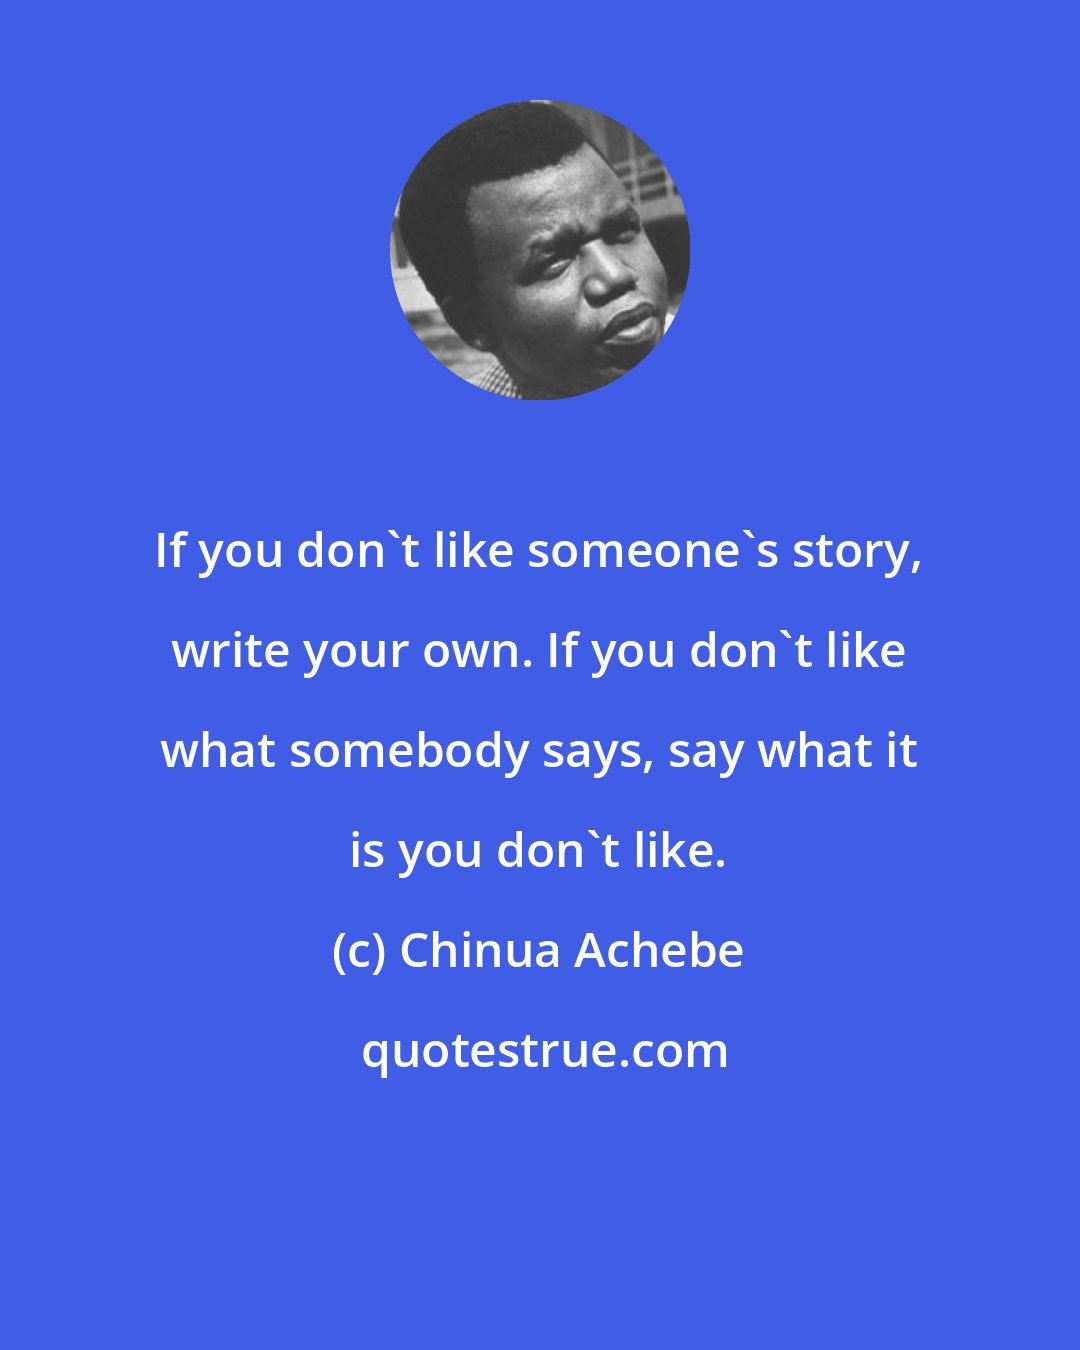 Chinua Achebe: If you don't like someone's story, write your own. If you don't like what somebody says, say what it is you don't like.